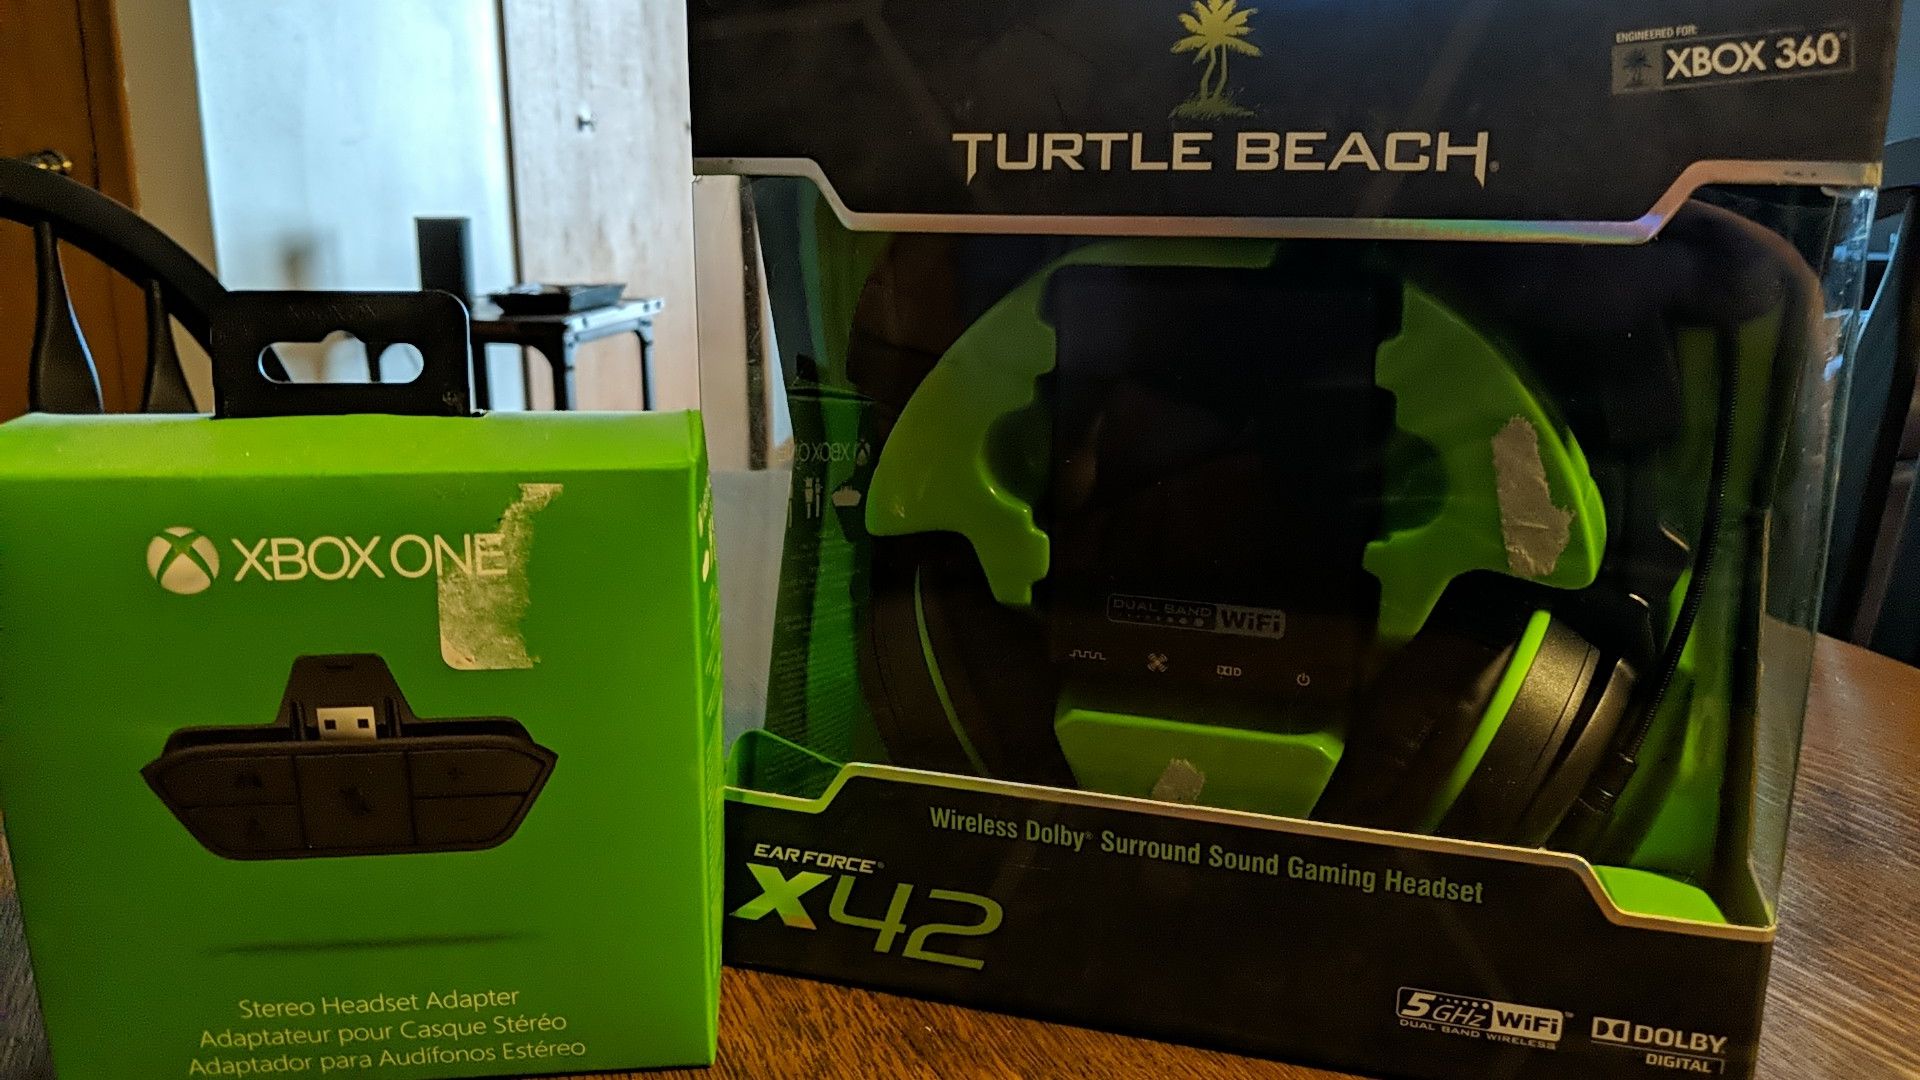 Turtle Beach Earforce x42 Wireless Dolby Surround Sound Gaming Headset w/ Xbox One Headset Adapter